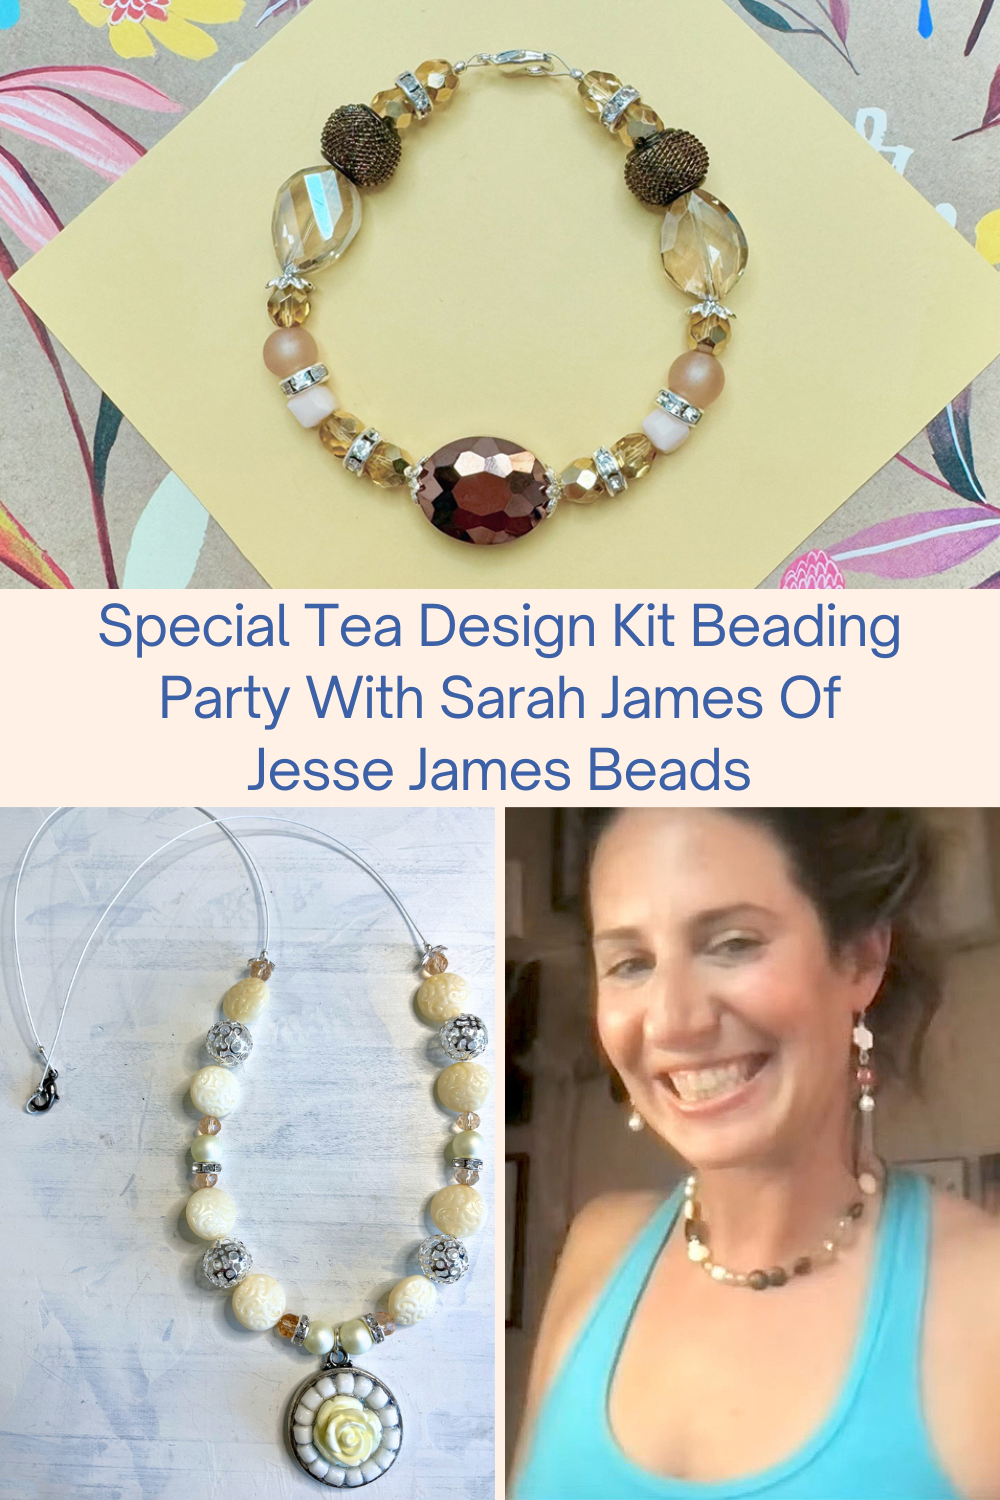 Special Tea Design Kit Beading Party With Sarah James Of Jesse James Beads Collage